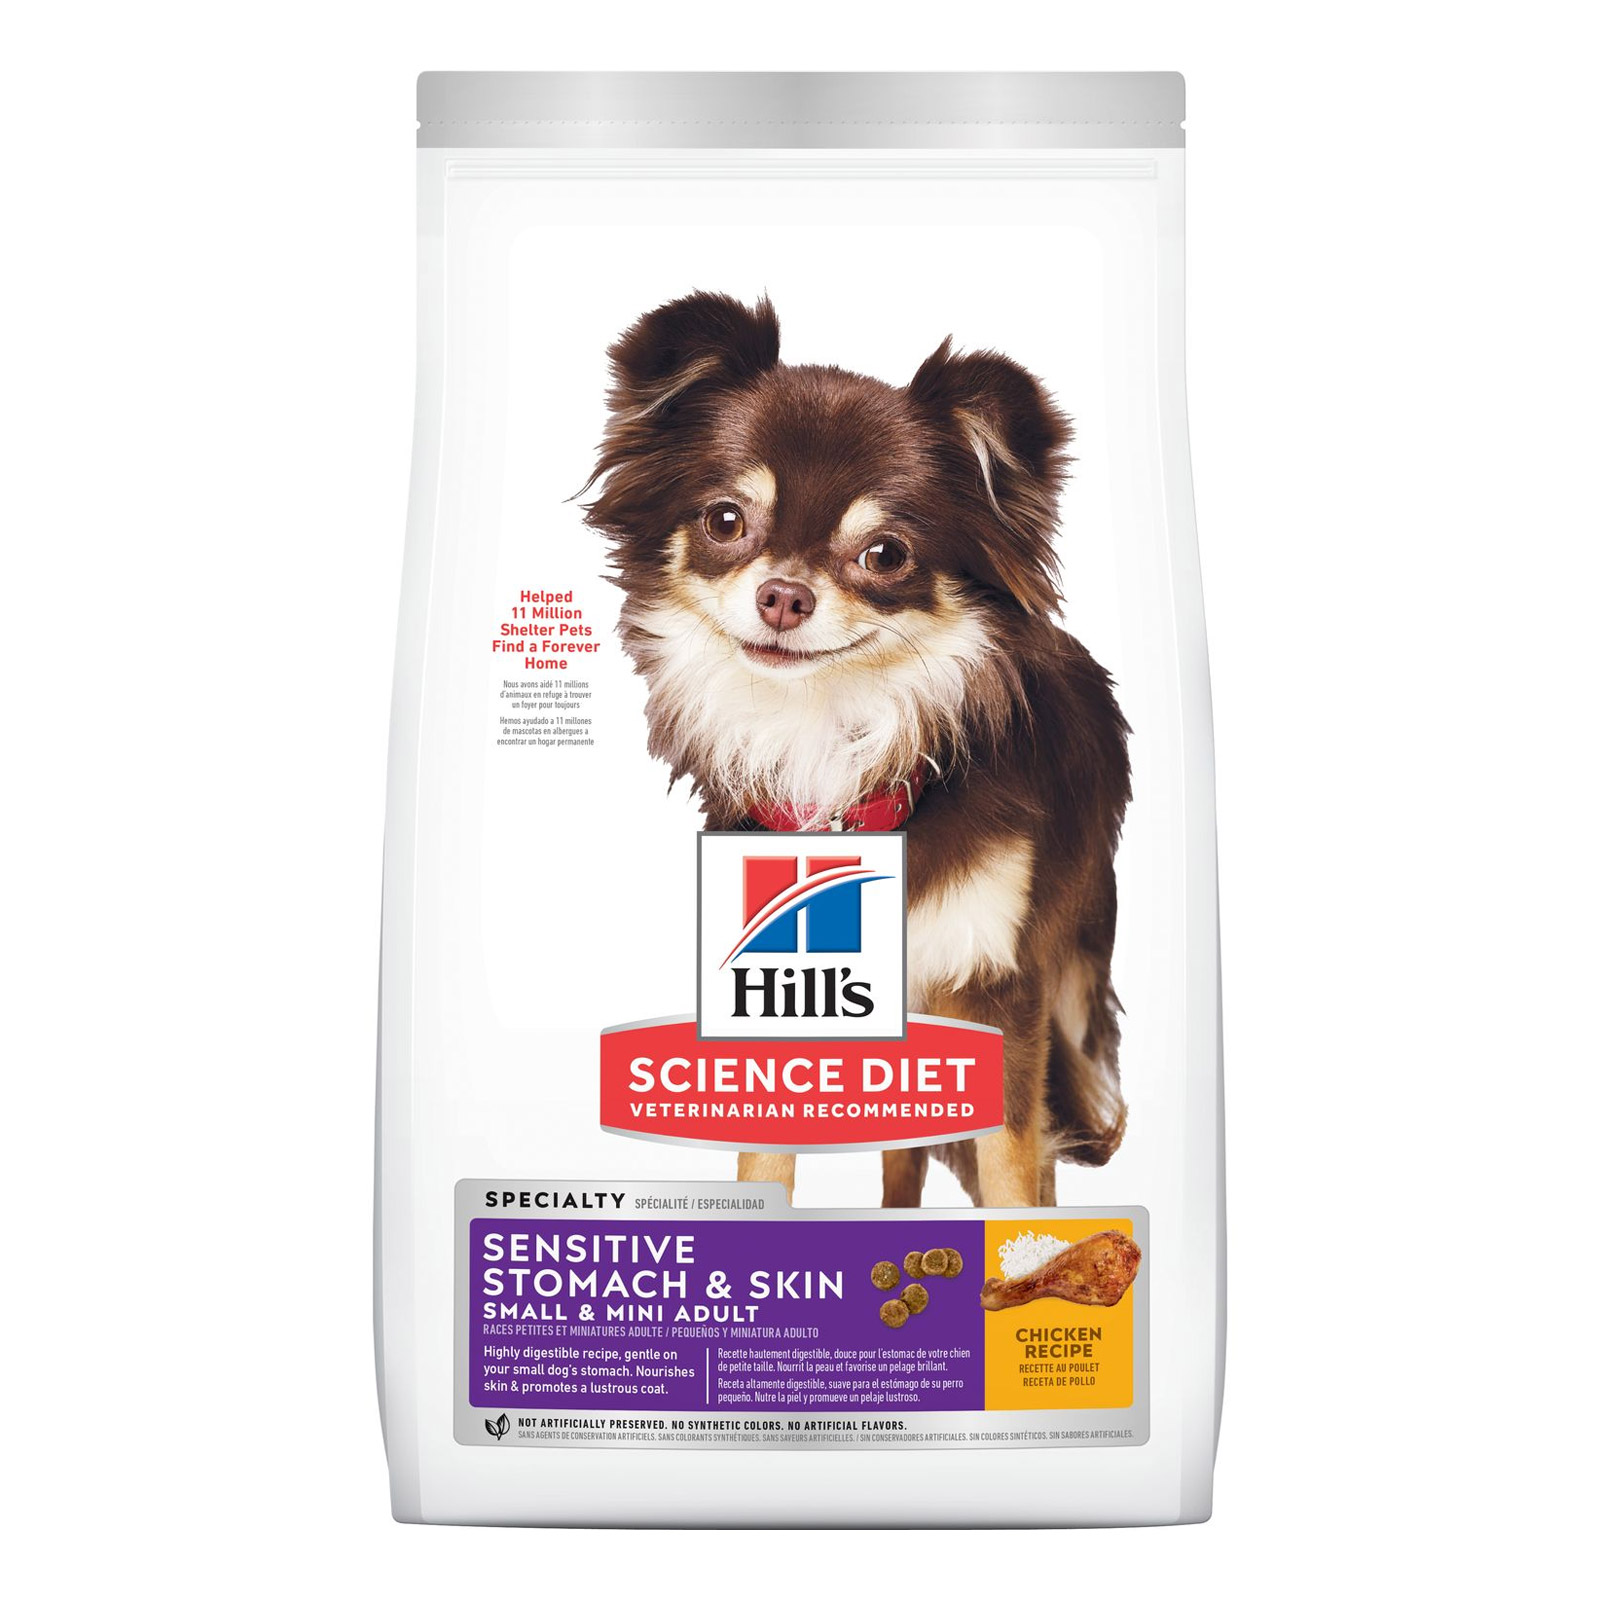 Hill's Science Diet Adult Sensitive Stomach & Skin Small & Mini Chicken Recipe Dog Food for Food